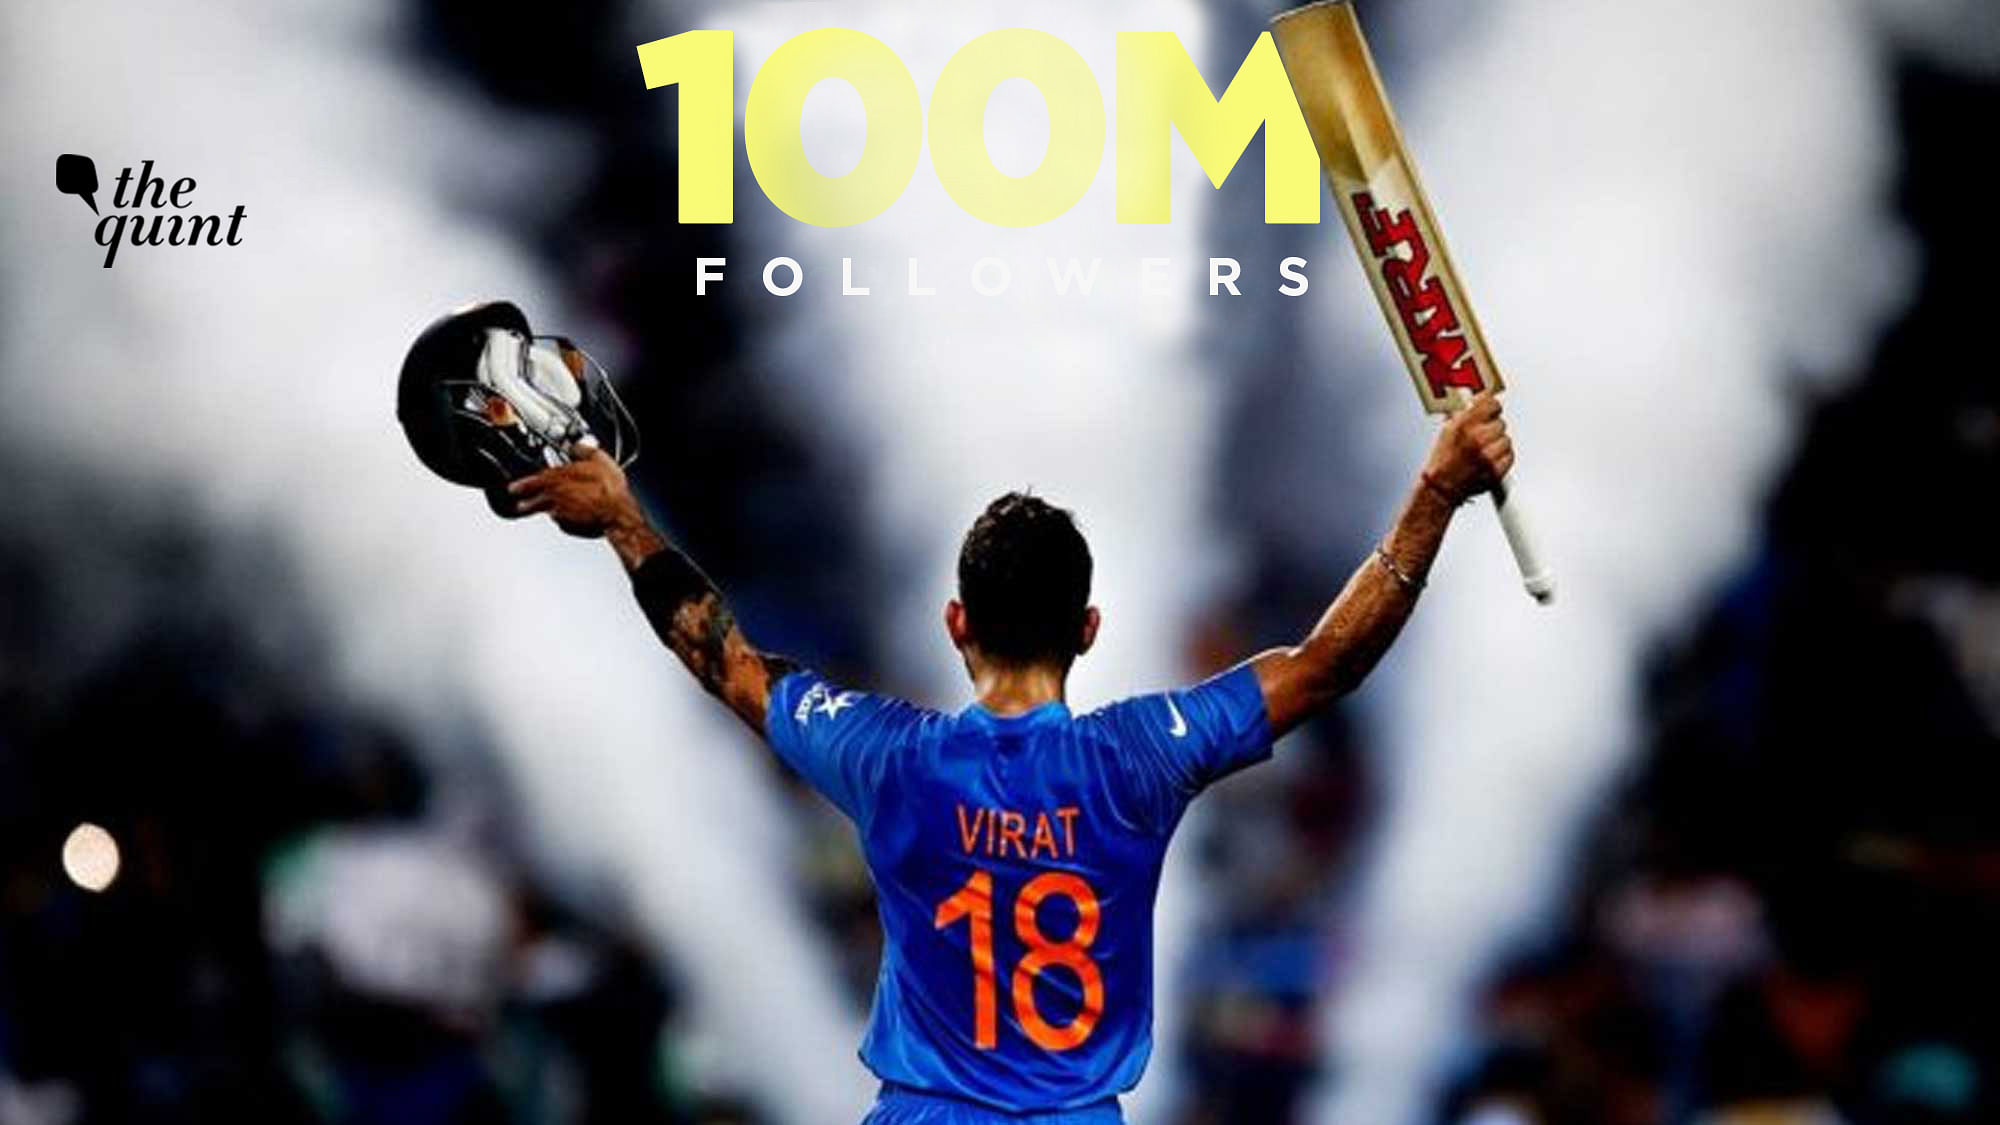 Virat Kohli is the only cricketer to have more than 100 million followers on Instagram.  &nbsp;